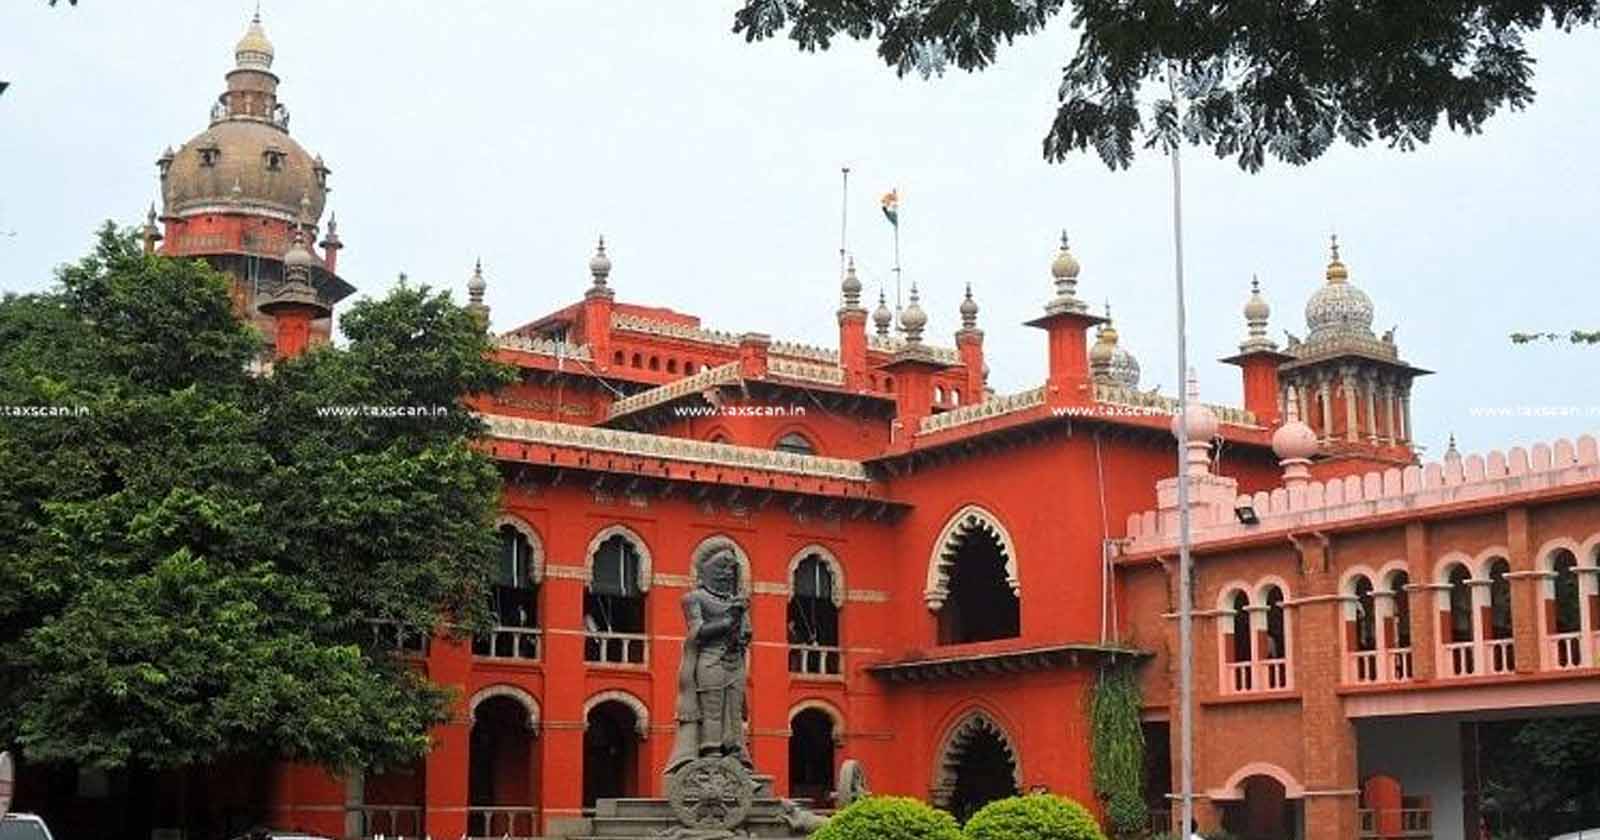 Tamil Nadu Tax on Entry of Motor Vehicles Act - Madras HC - high court - taxscan